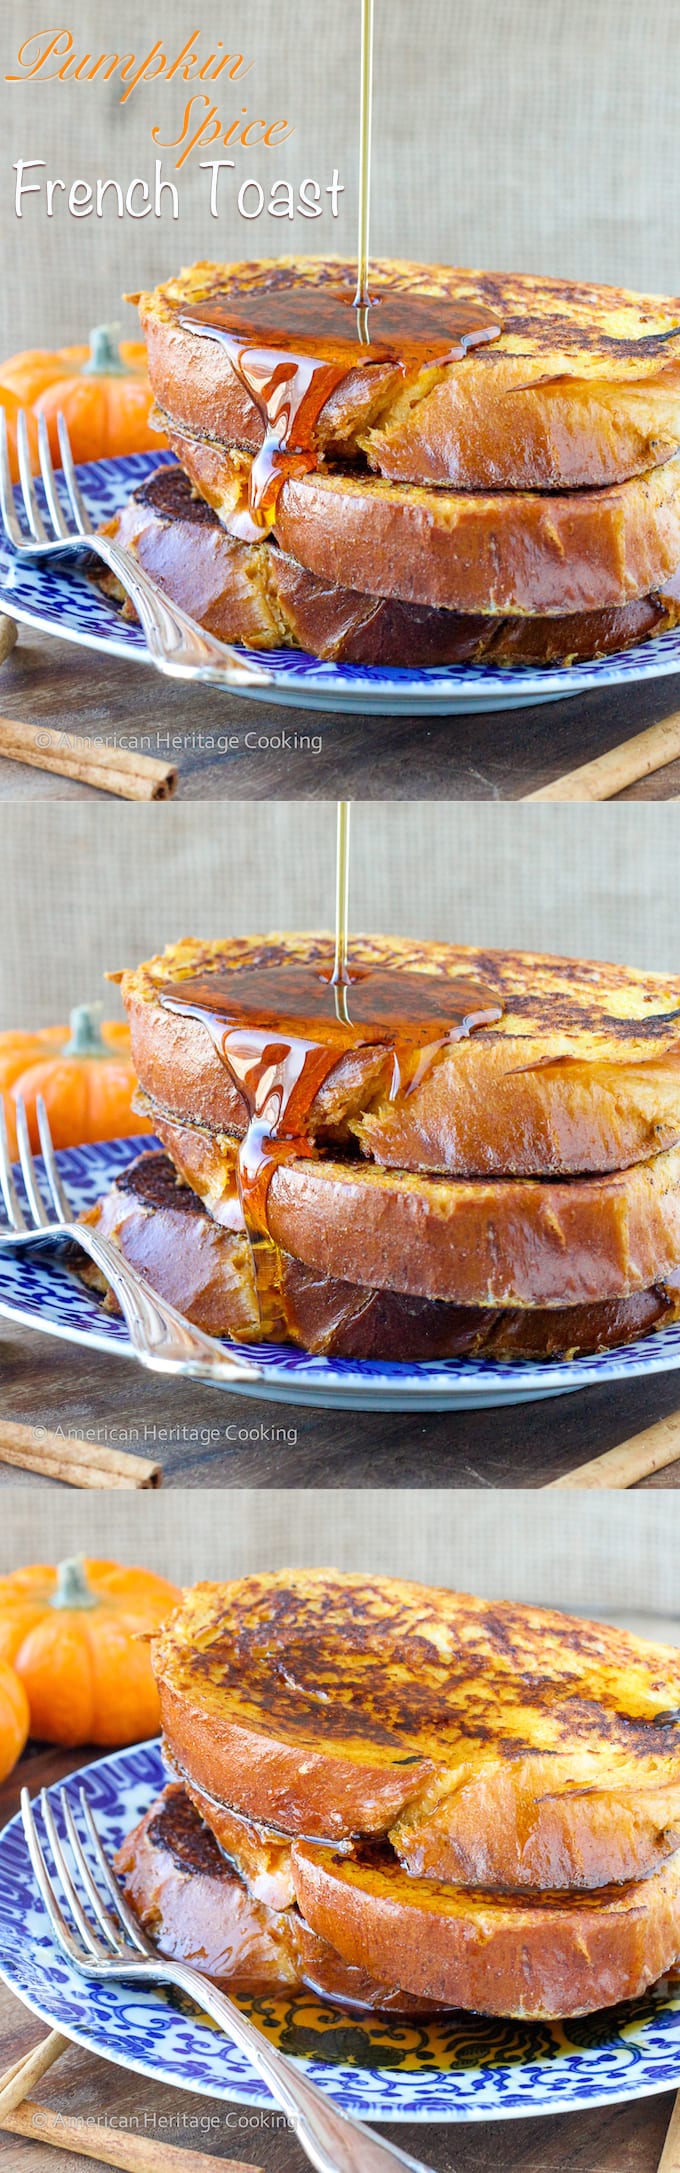 Pumpkin Spice French Toast | An easy Holiday Breakfast for Two!